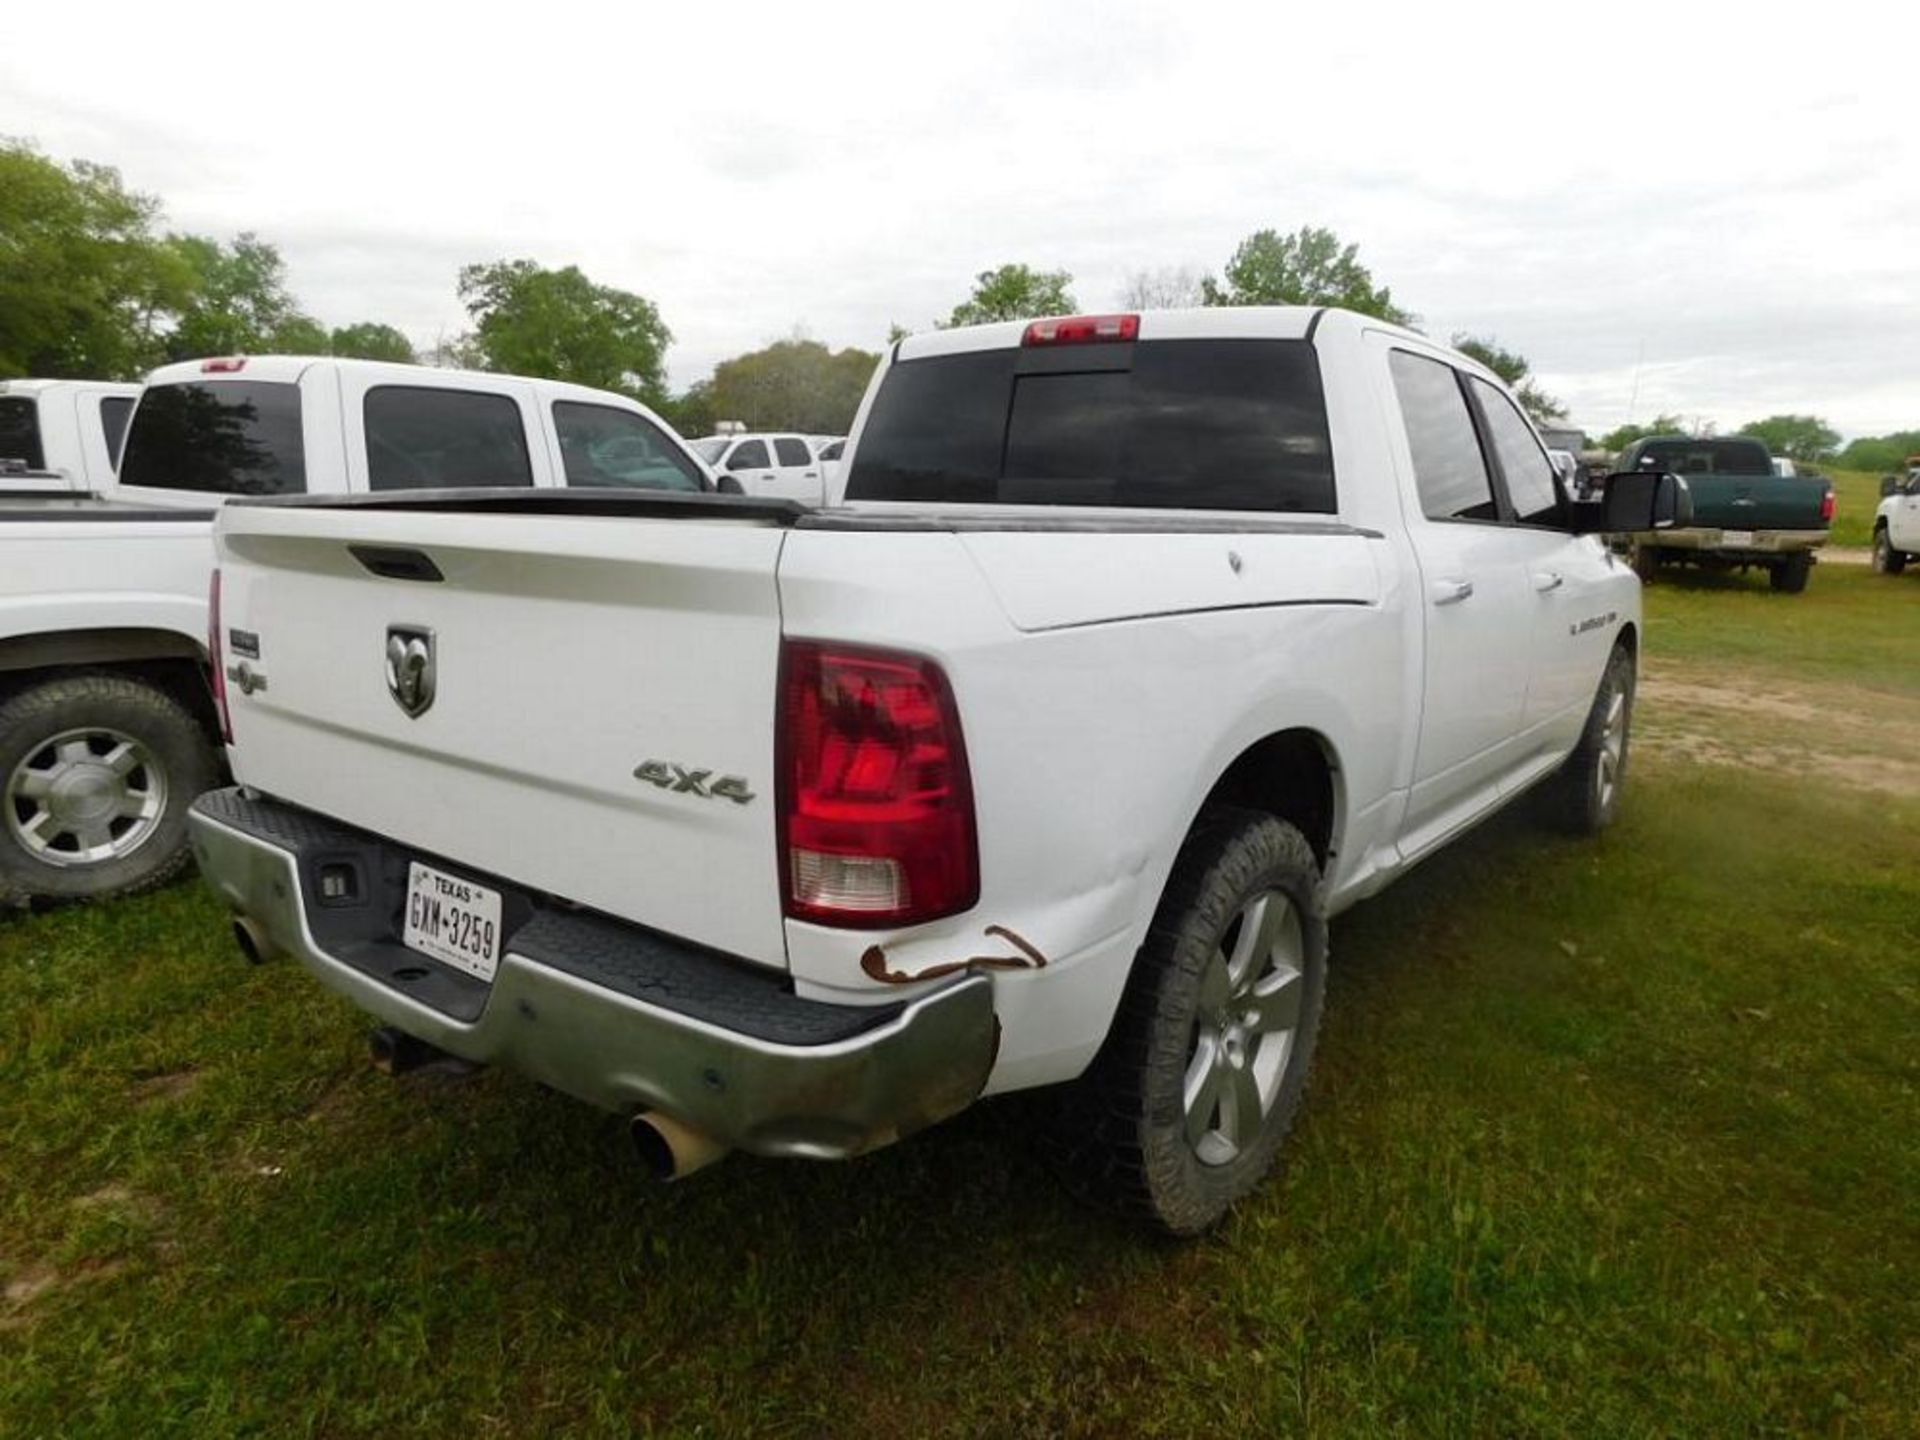 2012 Dodge Ram 1500 4x4 Crew Cab Pick-up Truck, VIN 1C6RD7LT3CS209341, 5-1/2 ft. Bed with Integral T - Image 4 of 5